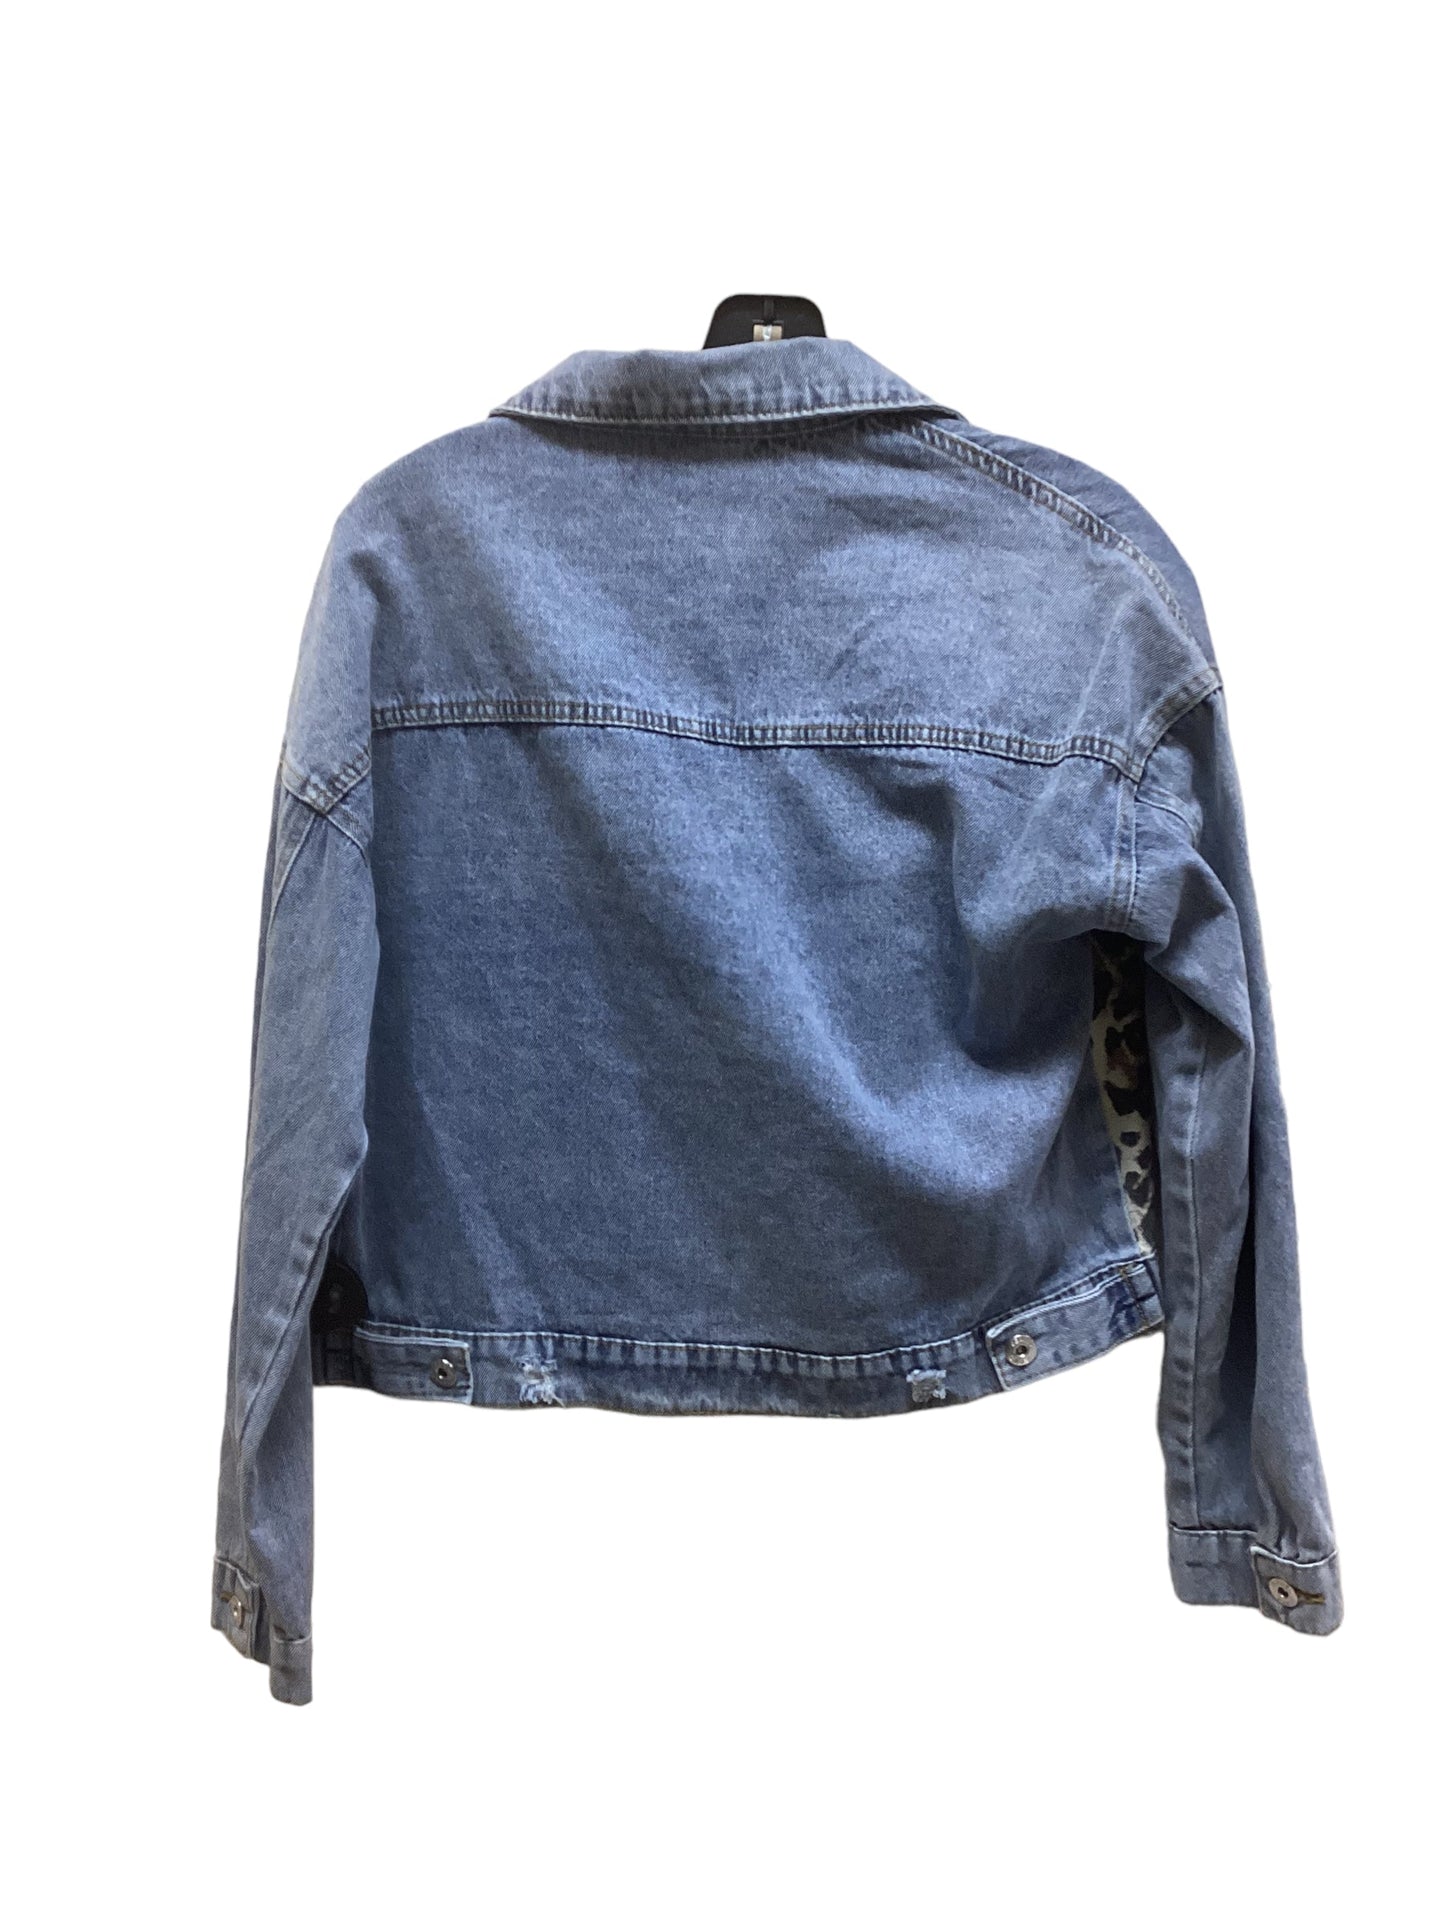 Jacket Denim By Clothes Mentor  Size: S